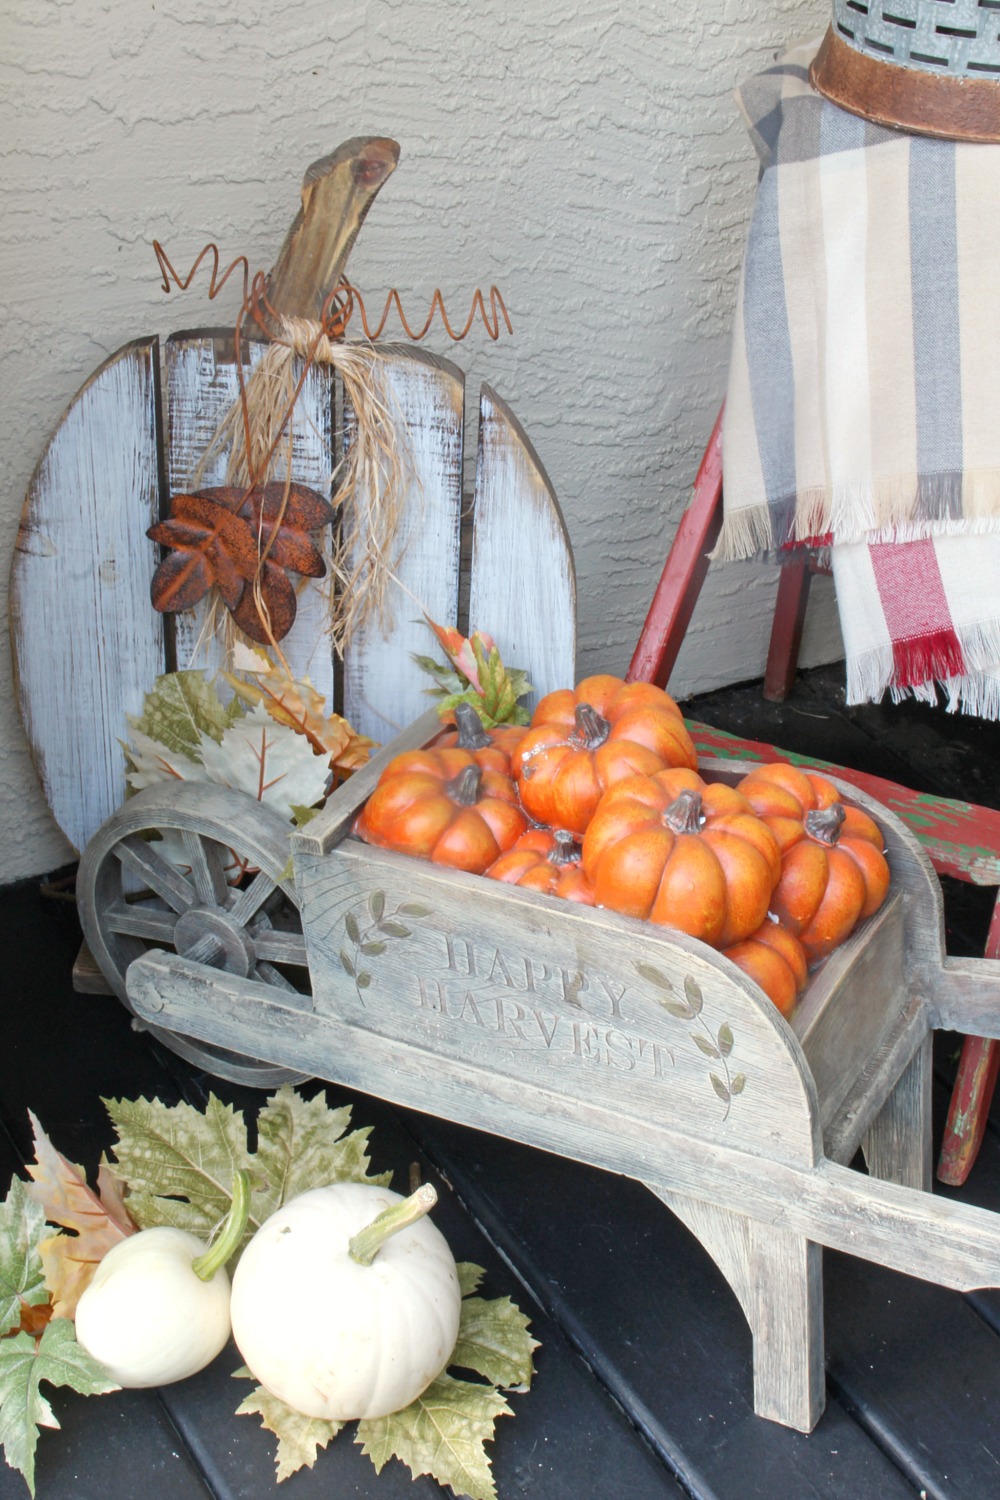 Colorful fall front porch decorating ideas. Rustic farmhouse style.